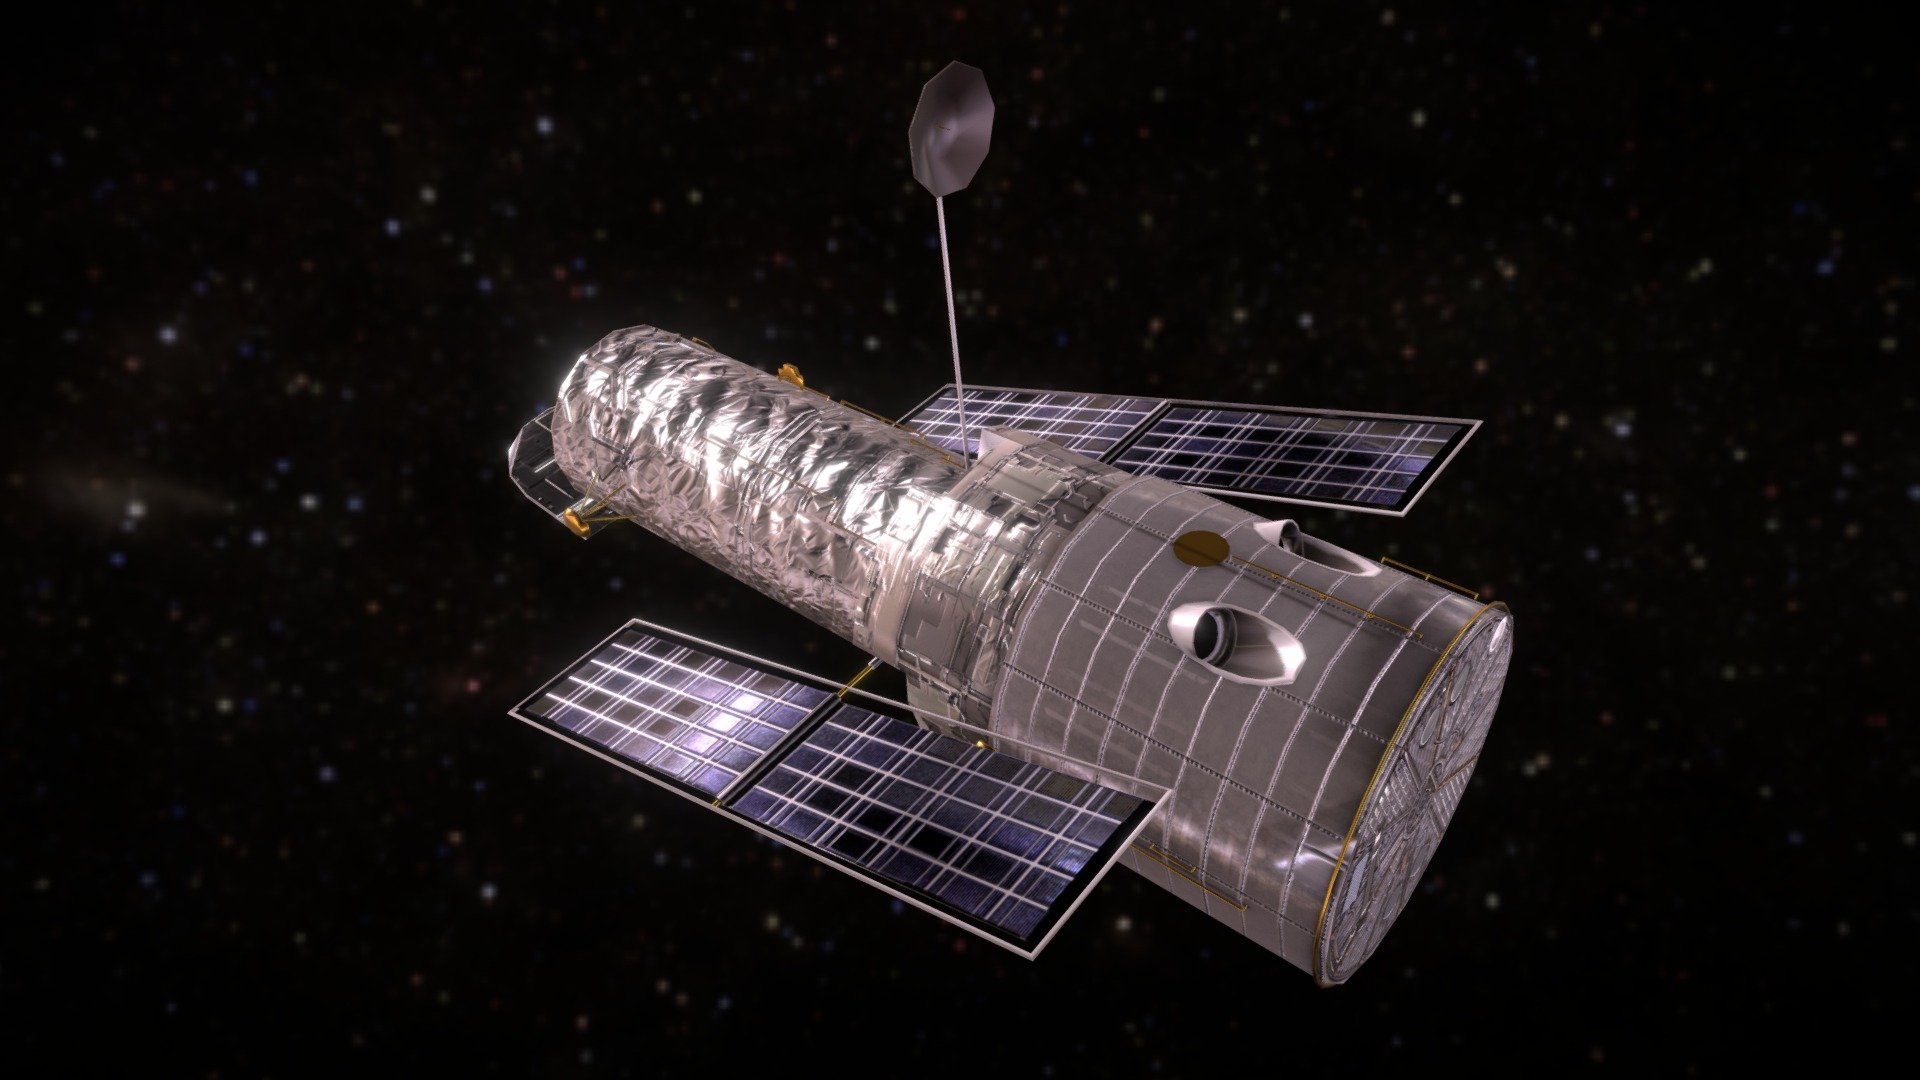 low poly model for mobile VR game - Hubble Space Telescope - 3D model by maimo 3d model